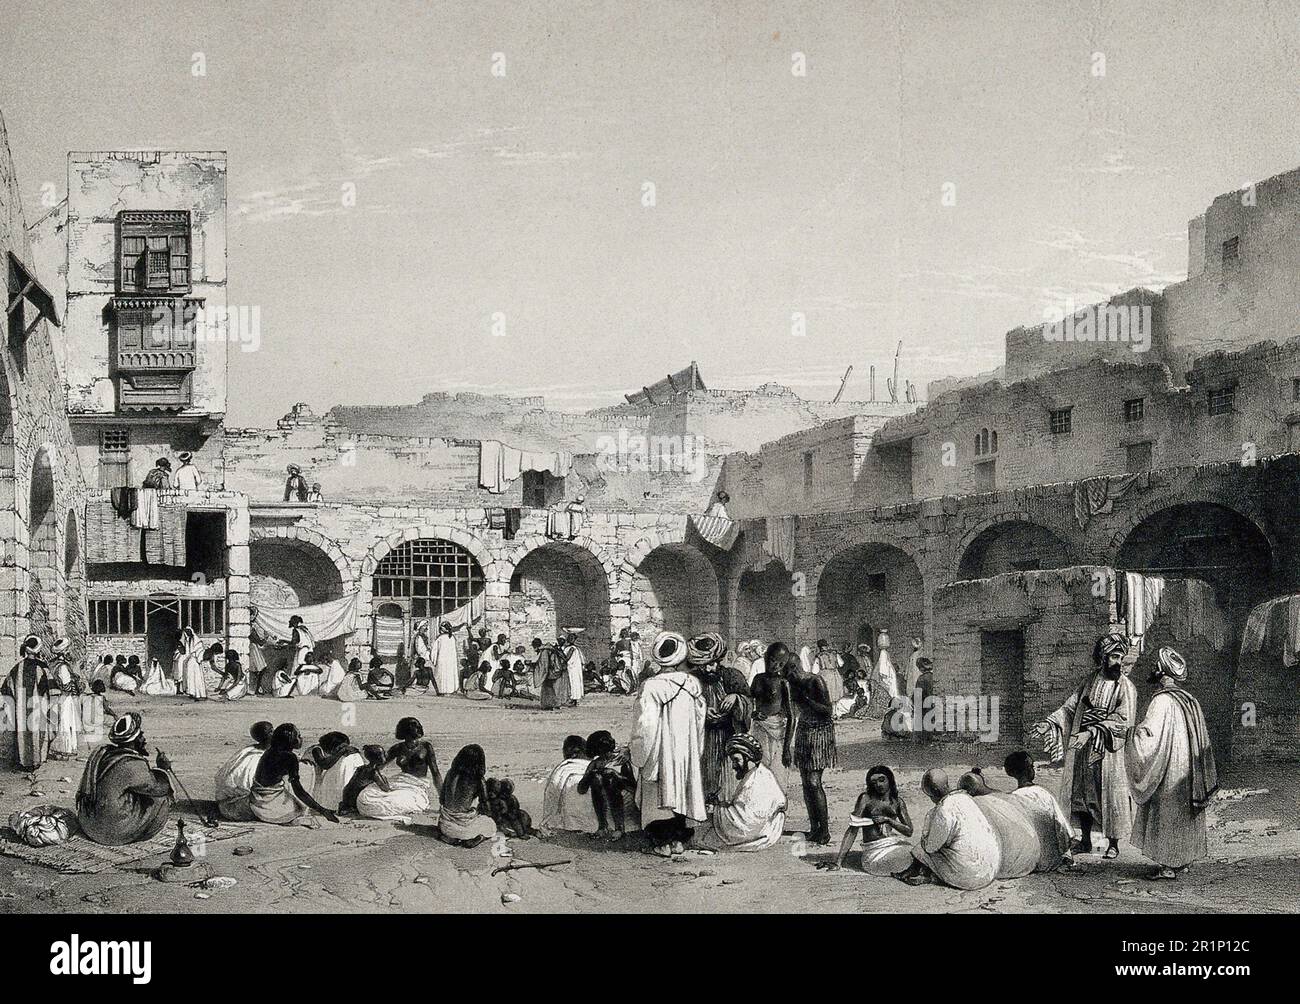 The Slave Market In Cairo C Egypt Historic Digitally Restored Reproduction From A Th